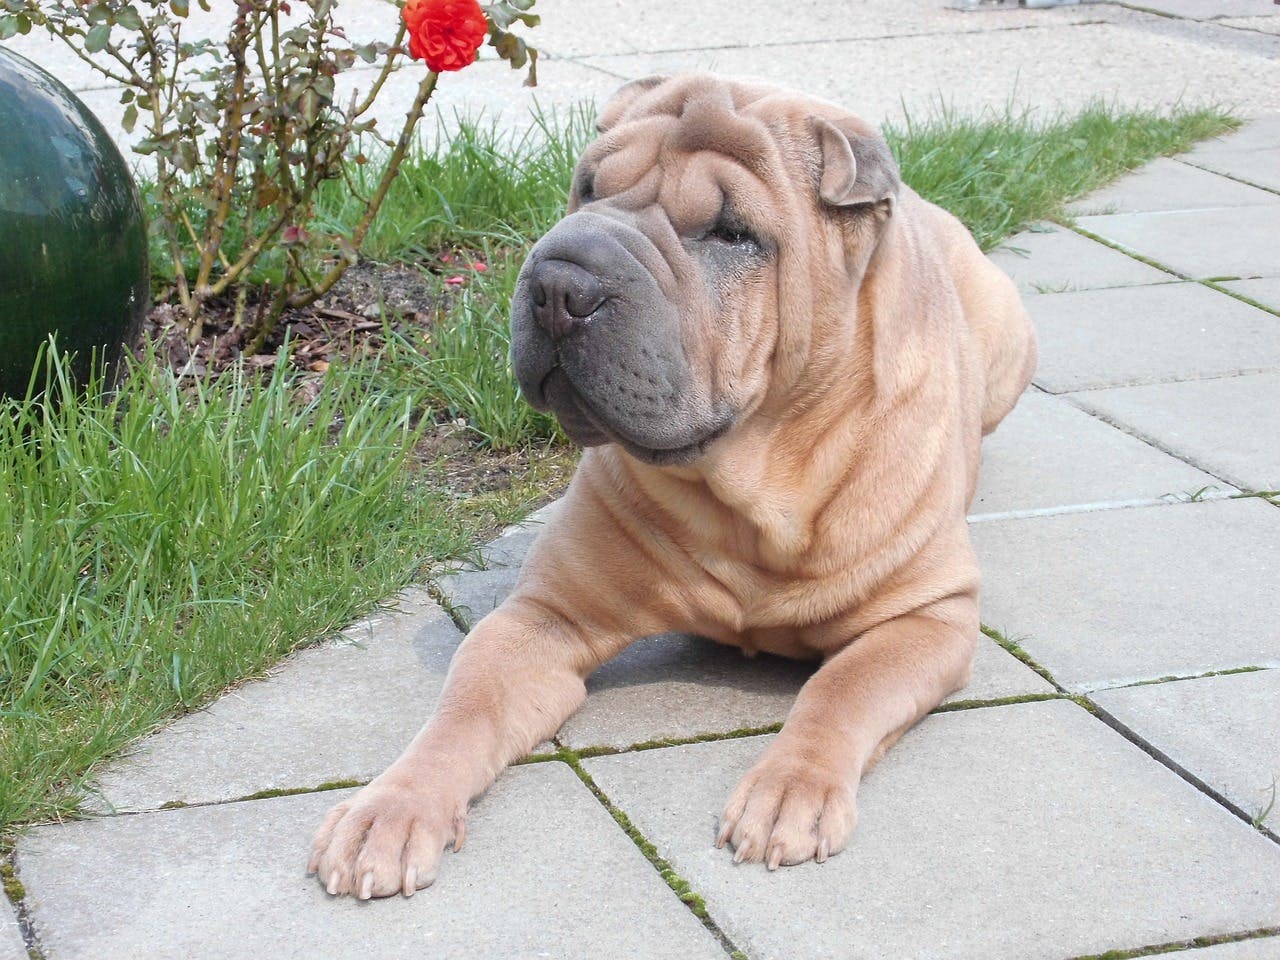 Shar Pei laying on a patio.